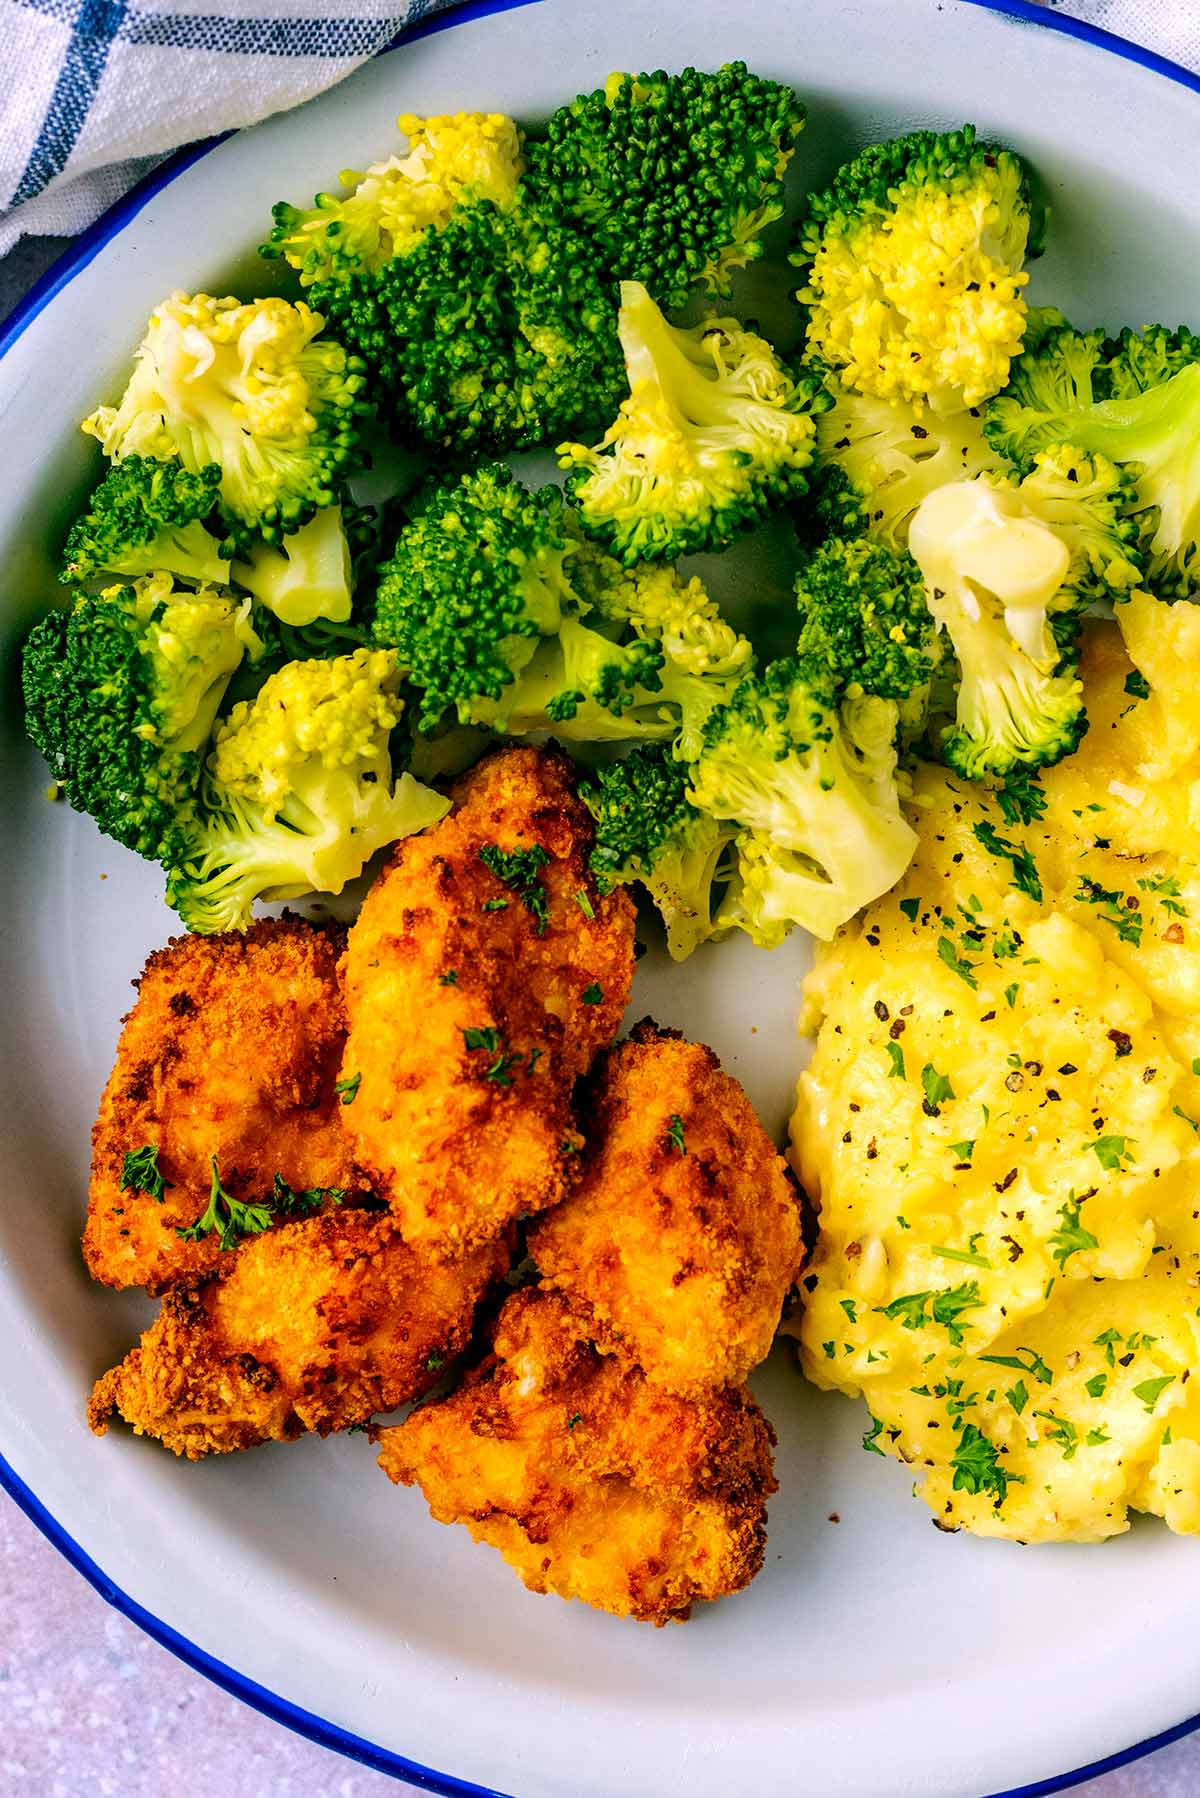 A plate of chicken nuggets, broccoli and mashed potato.